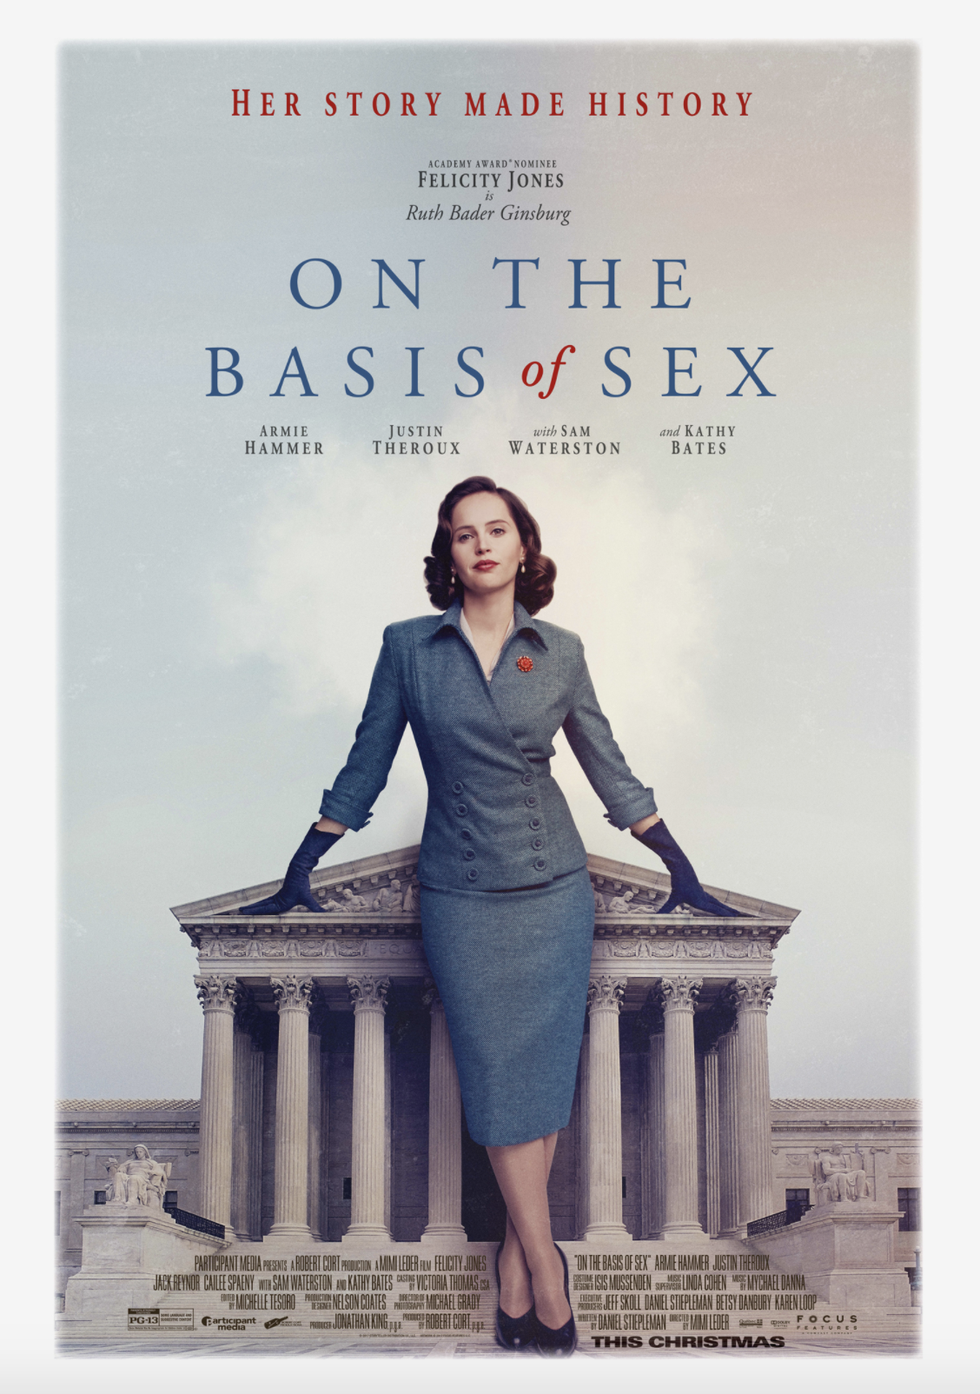 felicity jones as ruth bader ginsburg in 'on the basis of sex'